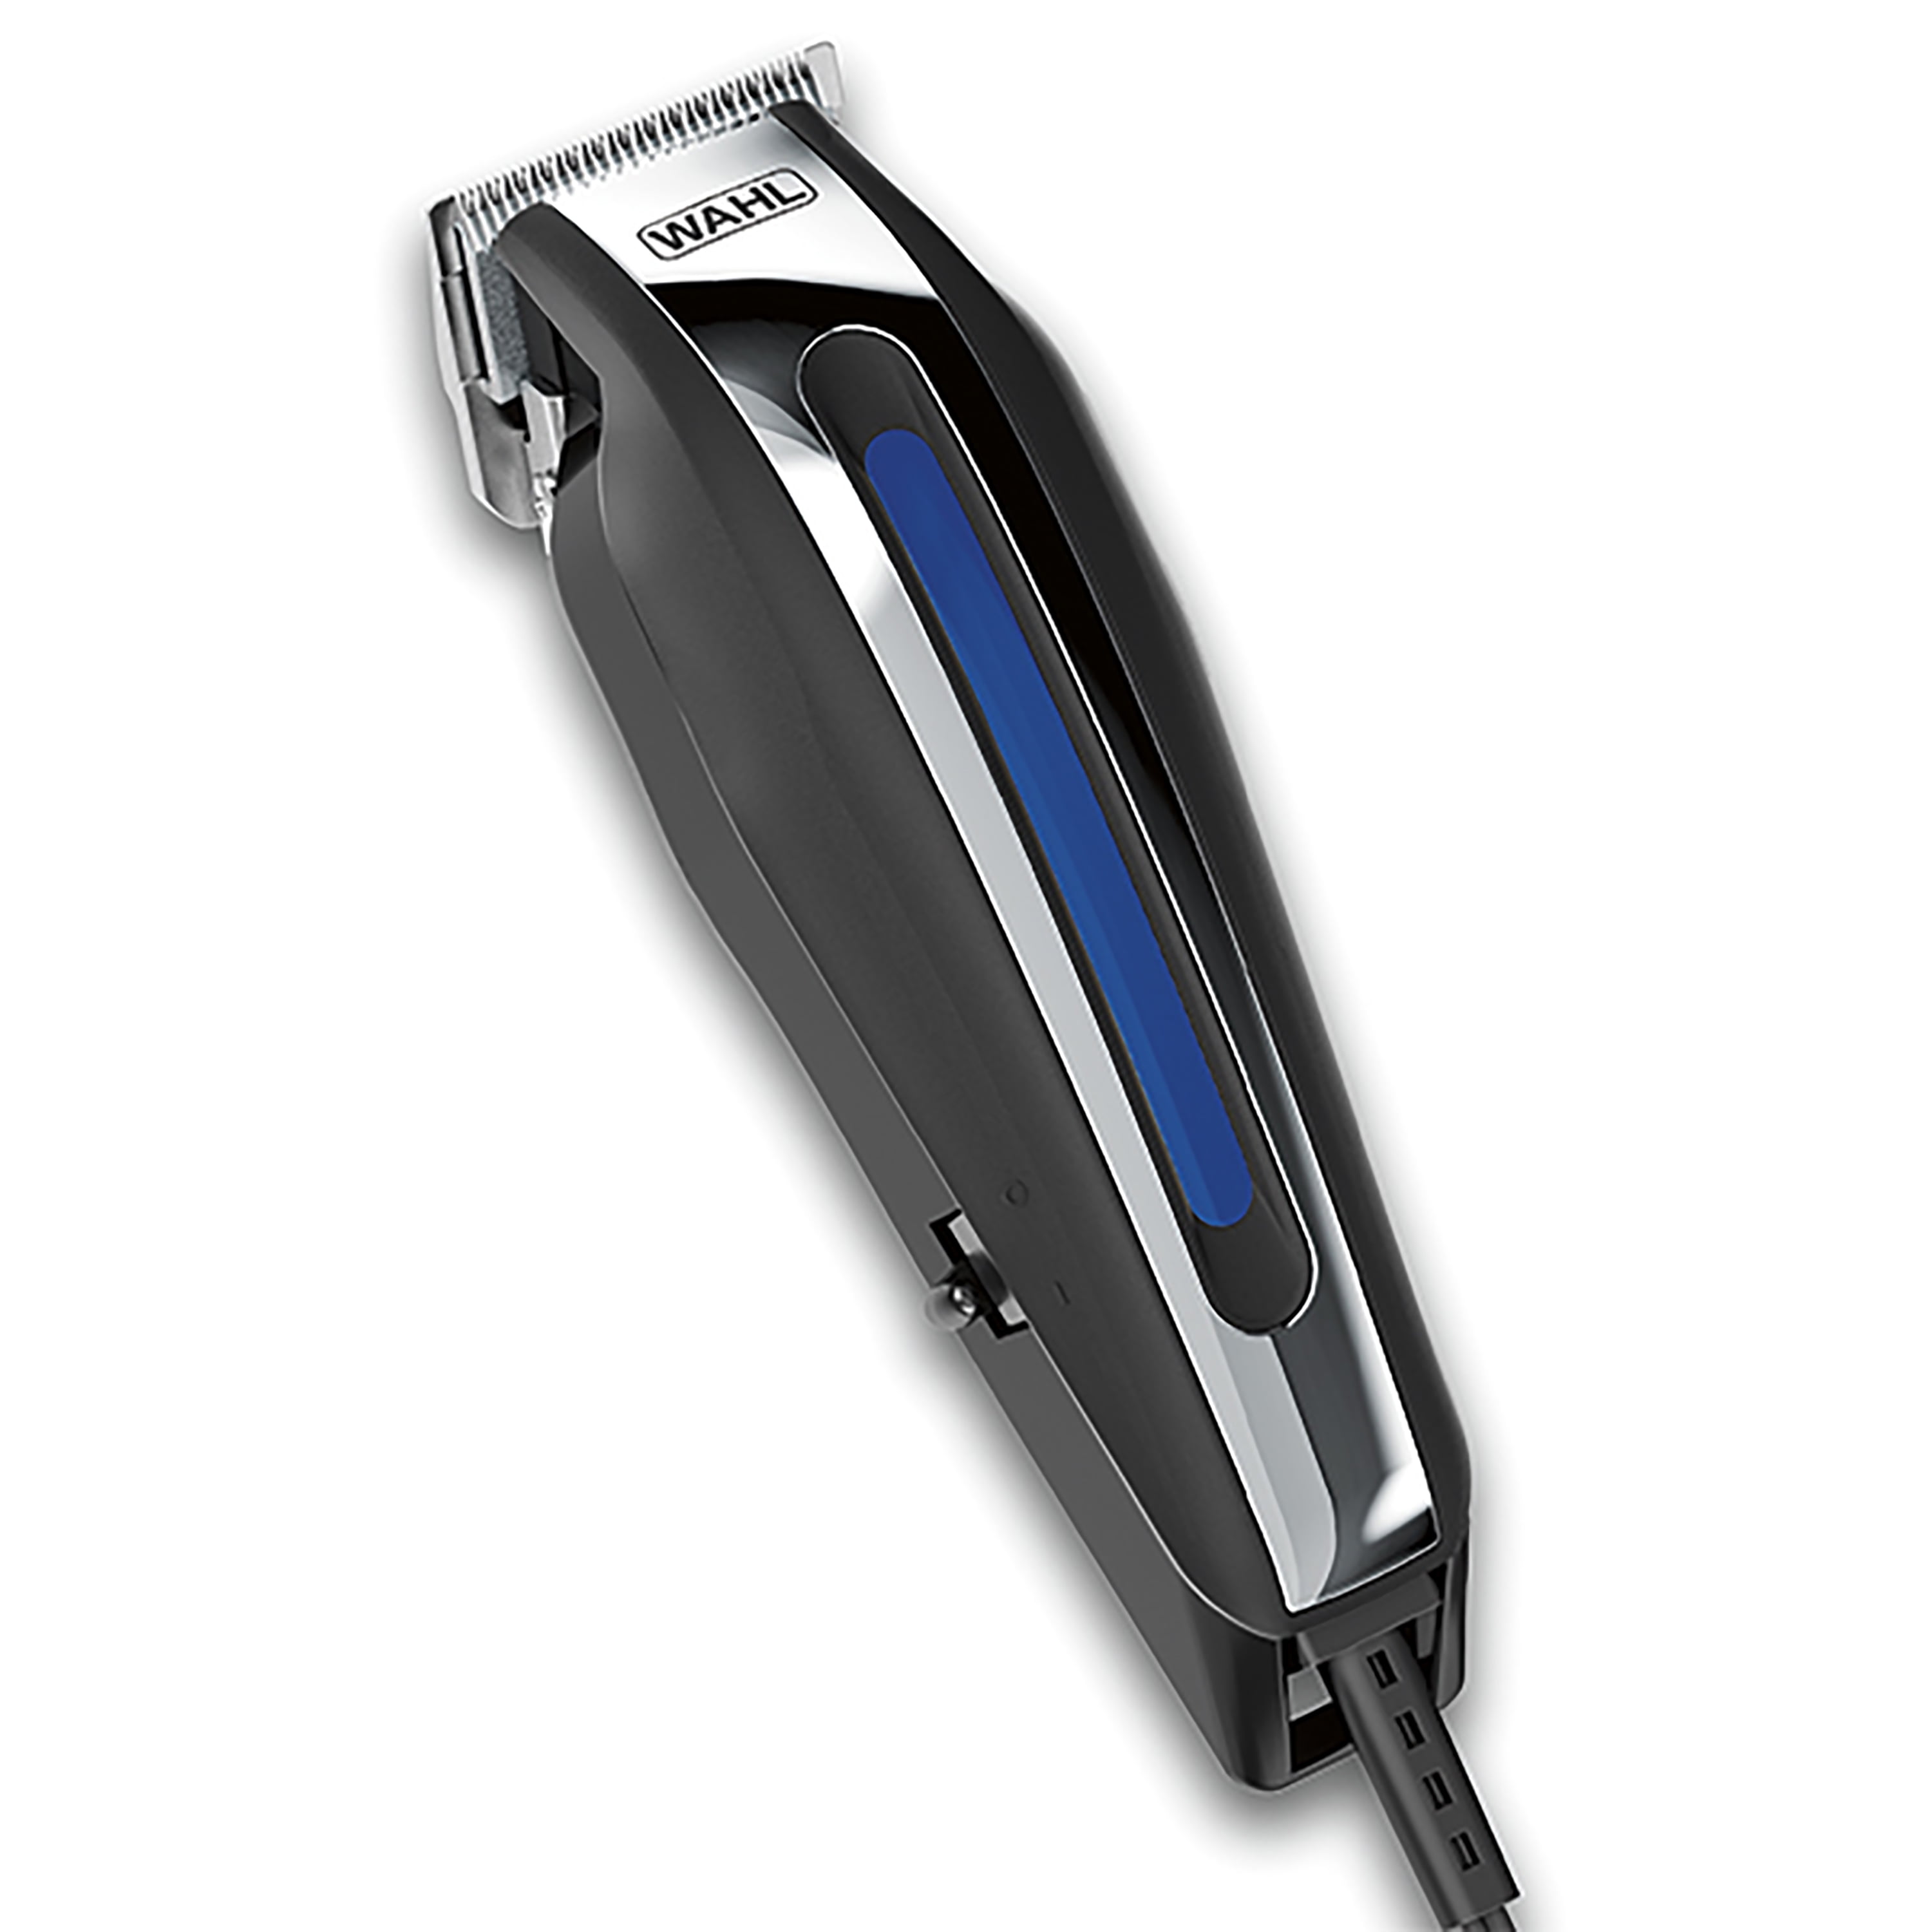 wahl clippers cutting skin